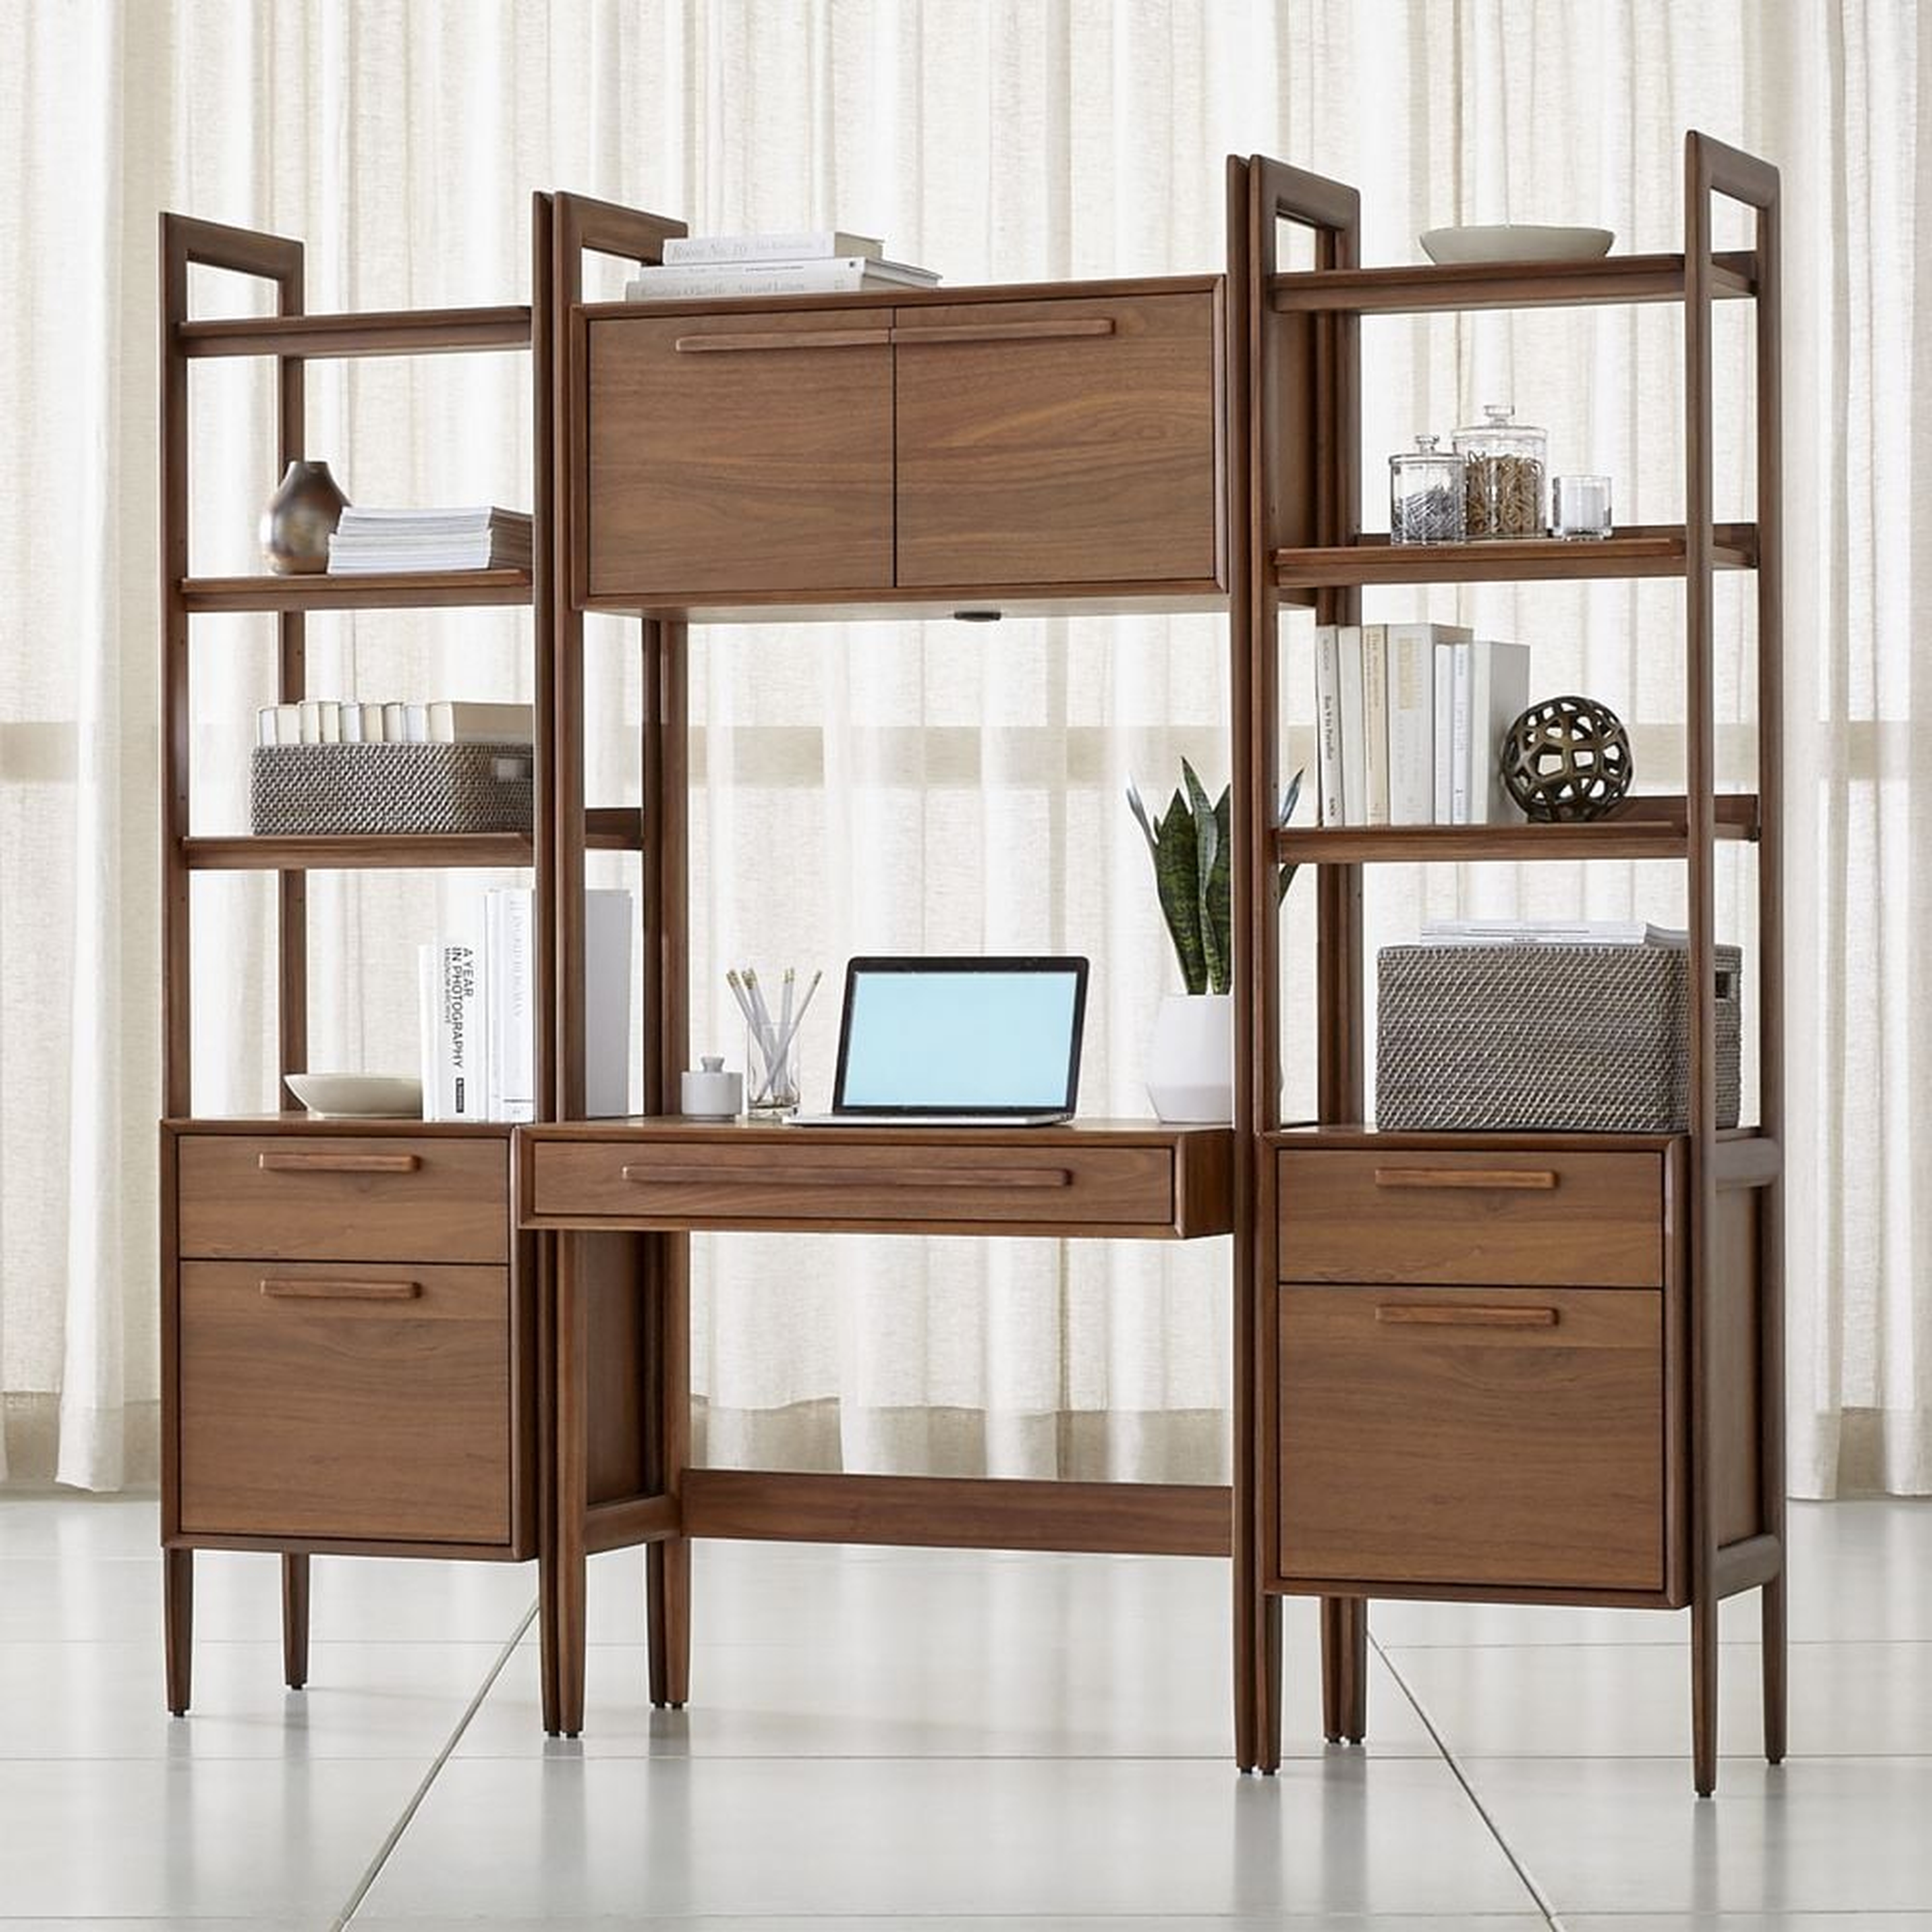 Tate Walnut Bookcase Desk with Outlet with 2 Bookcase File Cabinets - Crate and Barrel